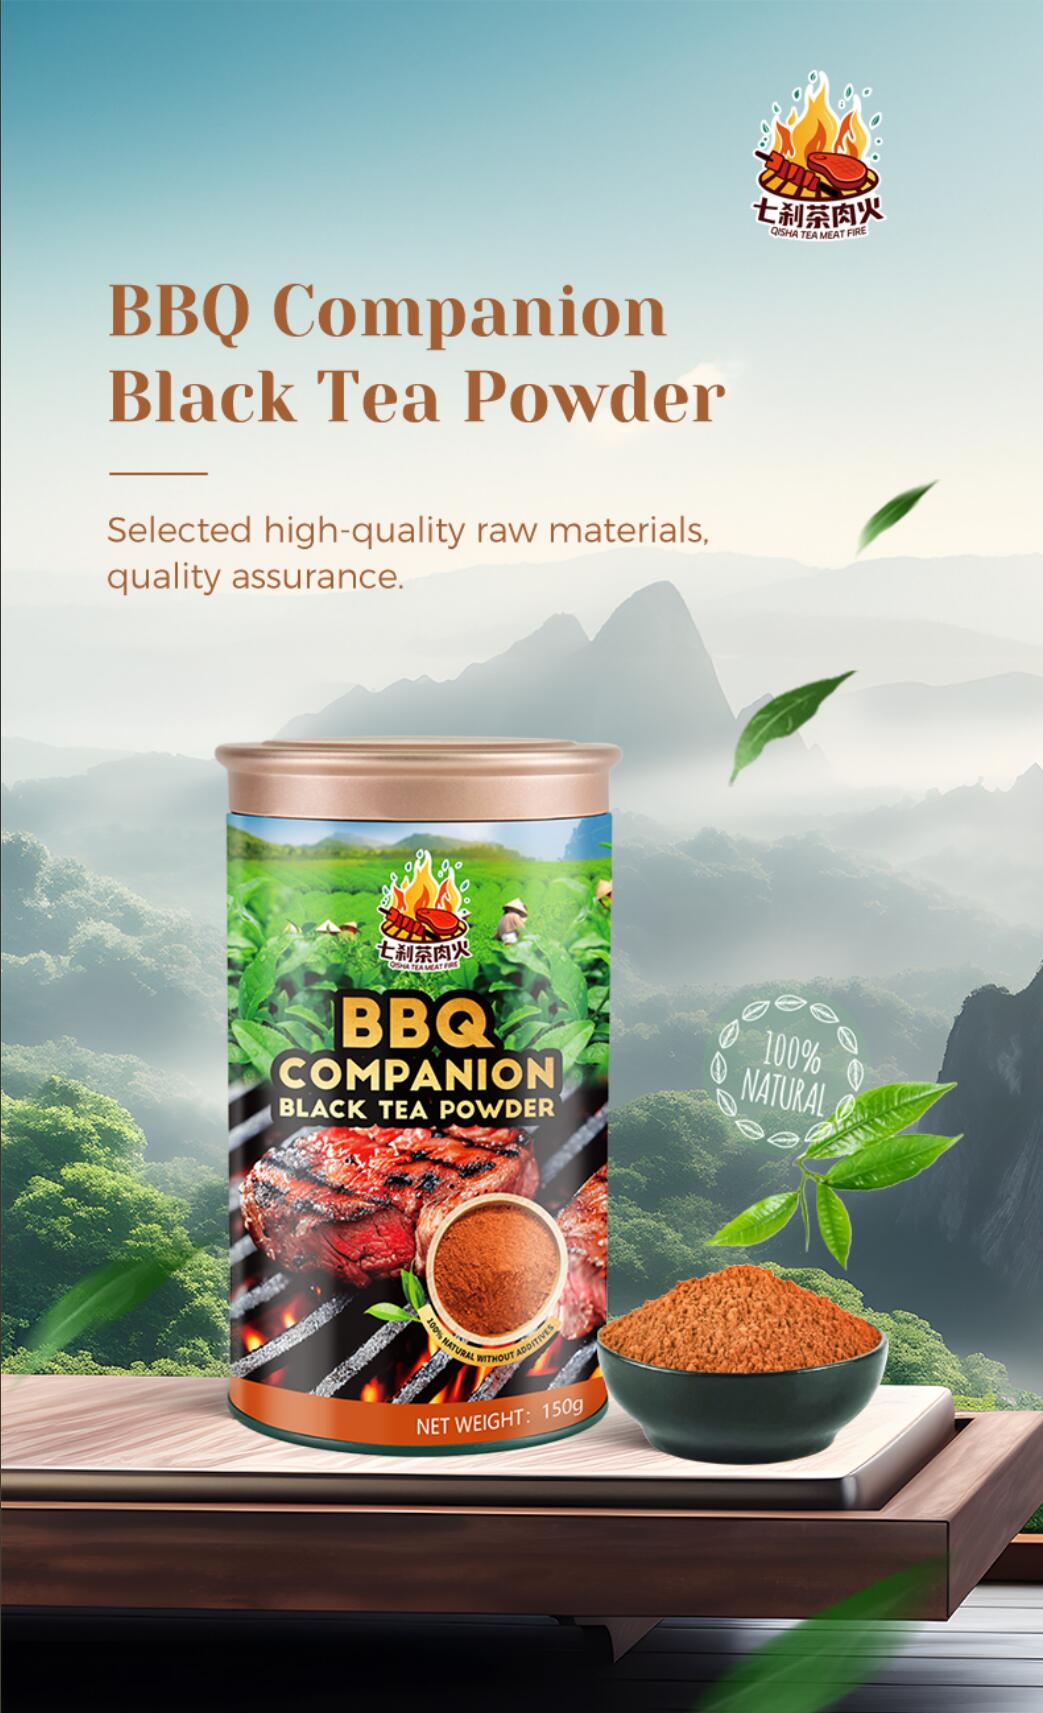 Chinese tea powder seasoning, essential for barbecue插图